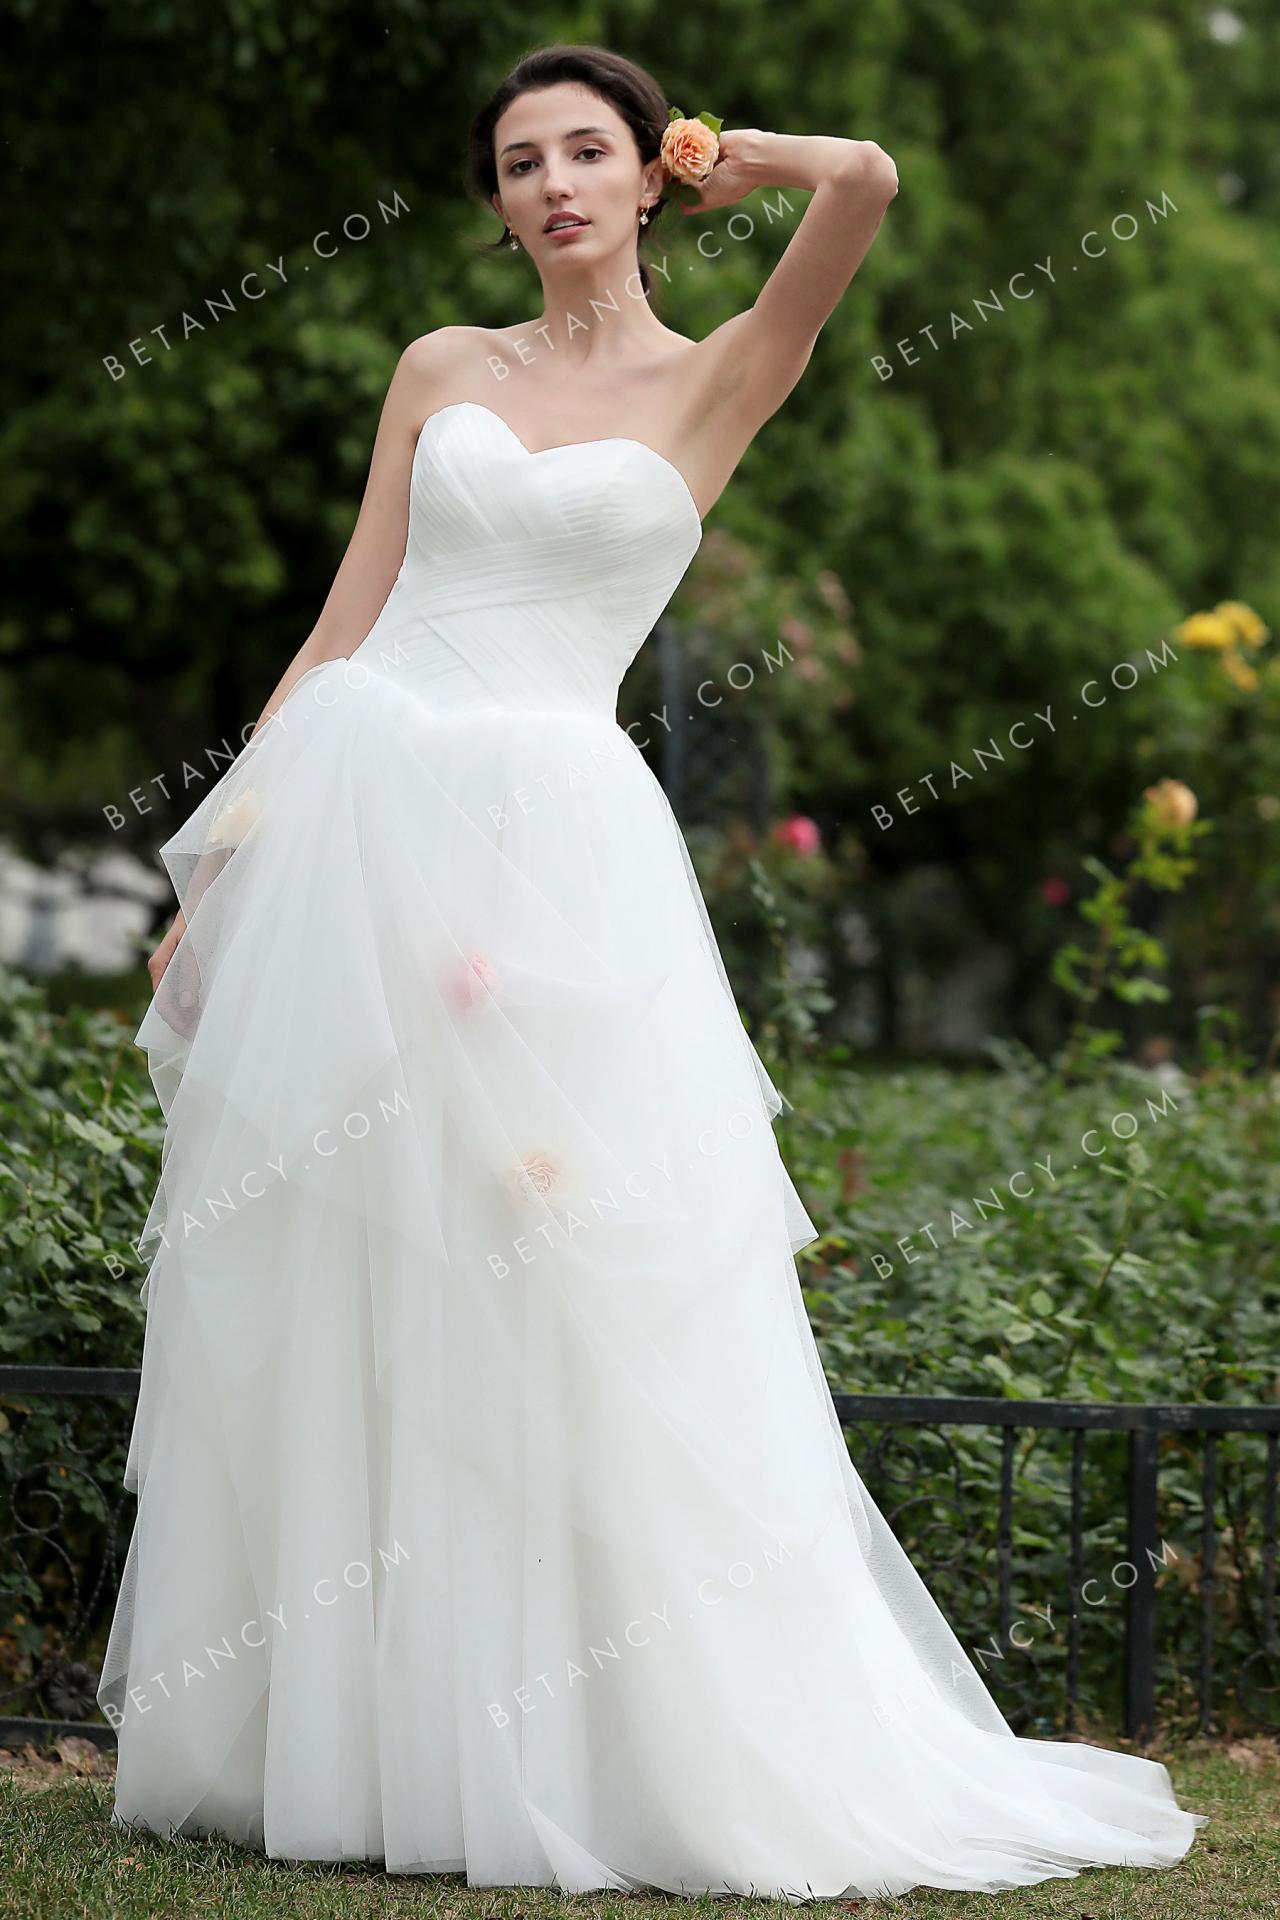 Pleated tulle pricess bridal gown with flowers adorned 1